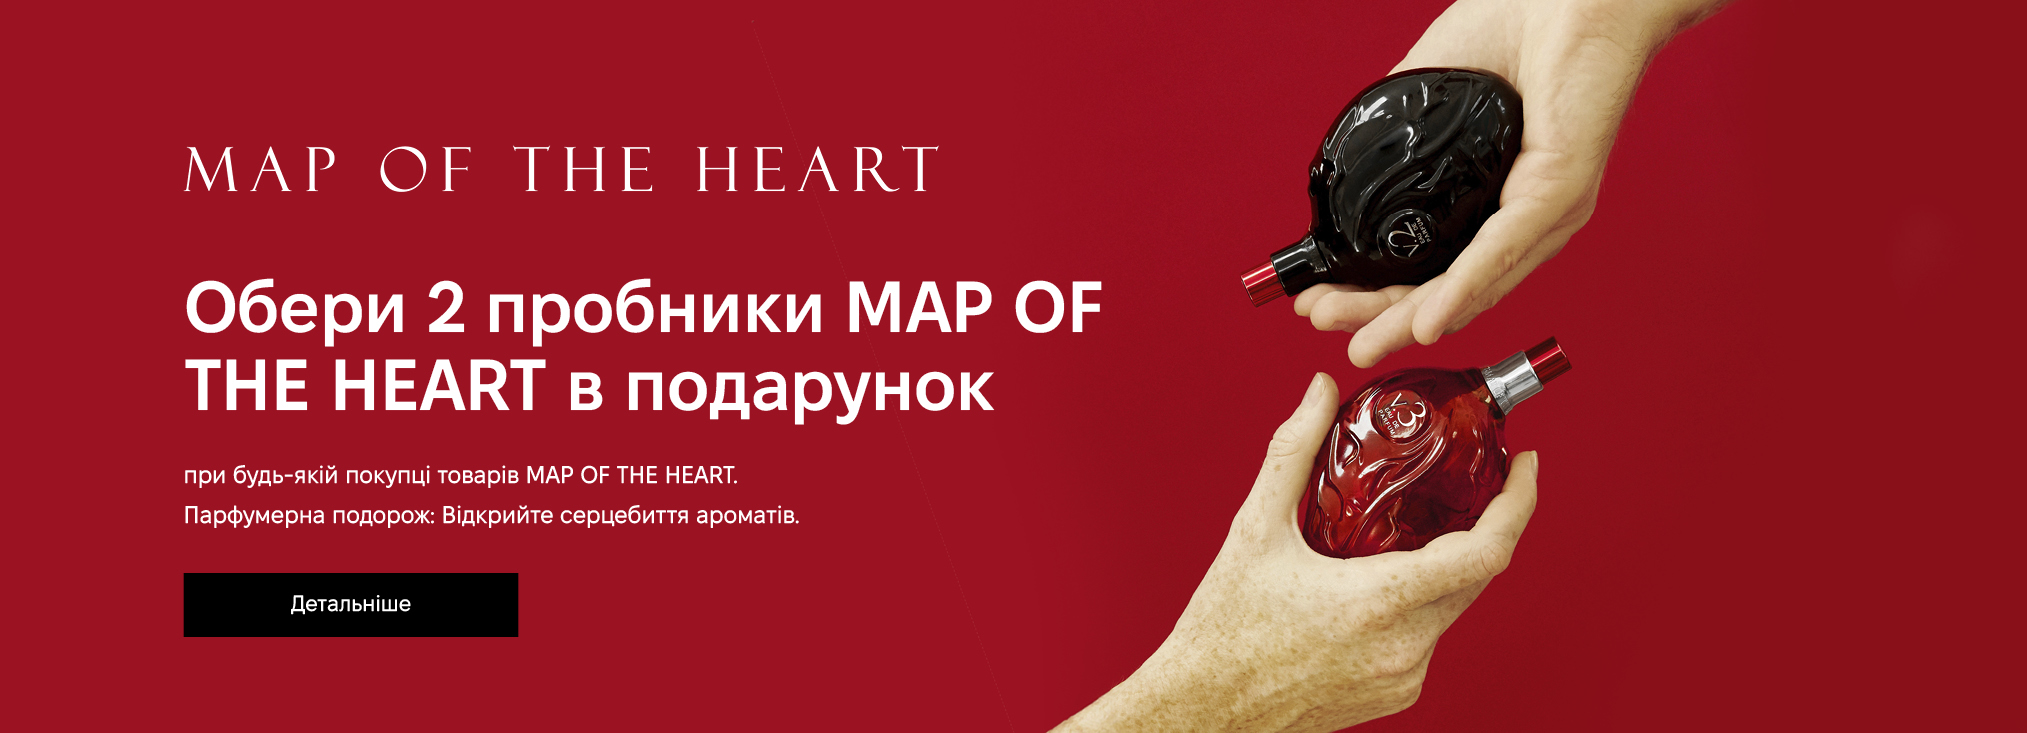 Map Of The Heart_3